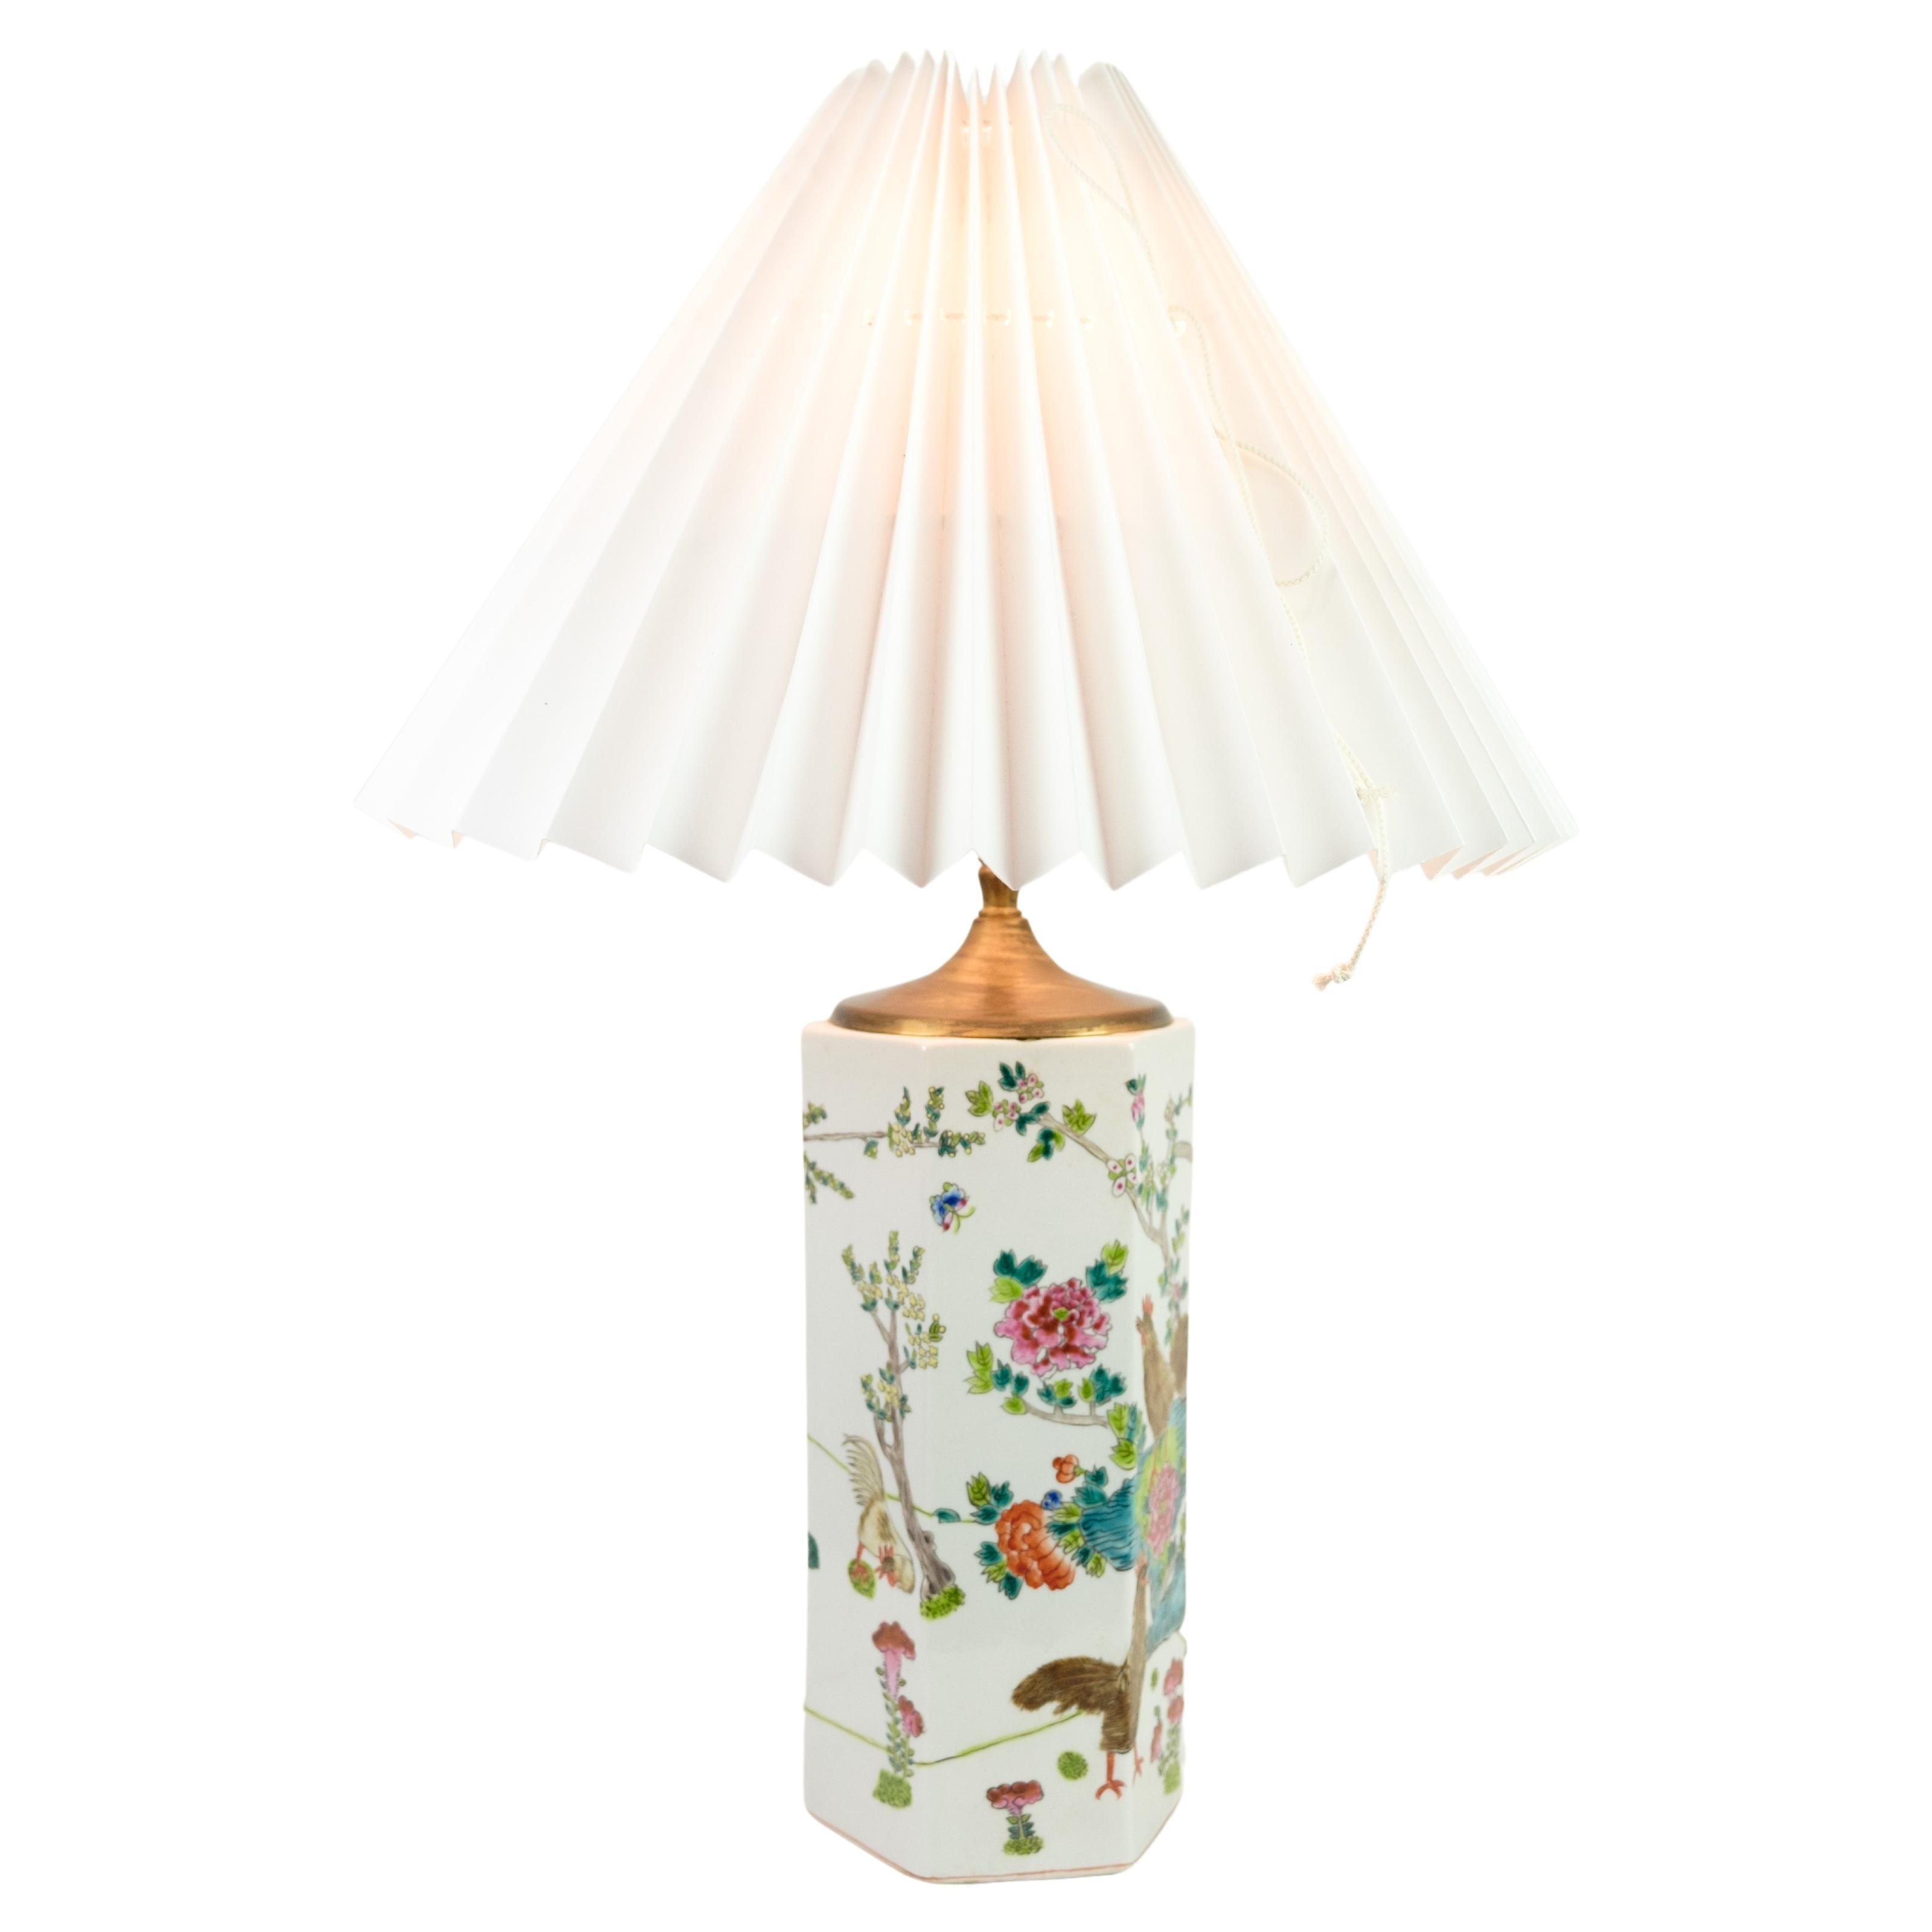 Chinese Table Lamp Made In Porcelain With White Shade From 1920s For Sale